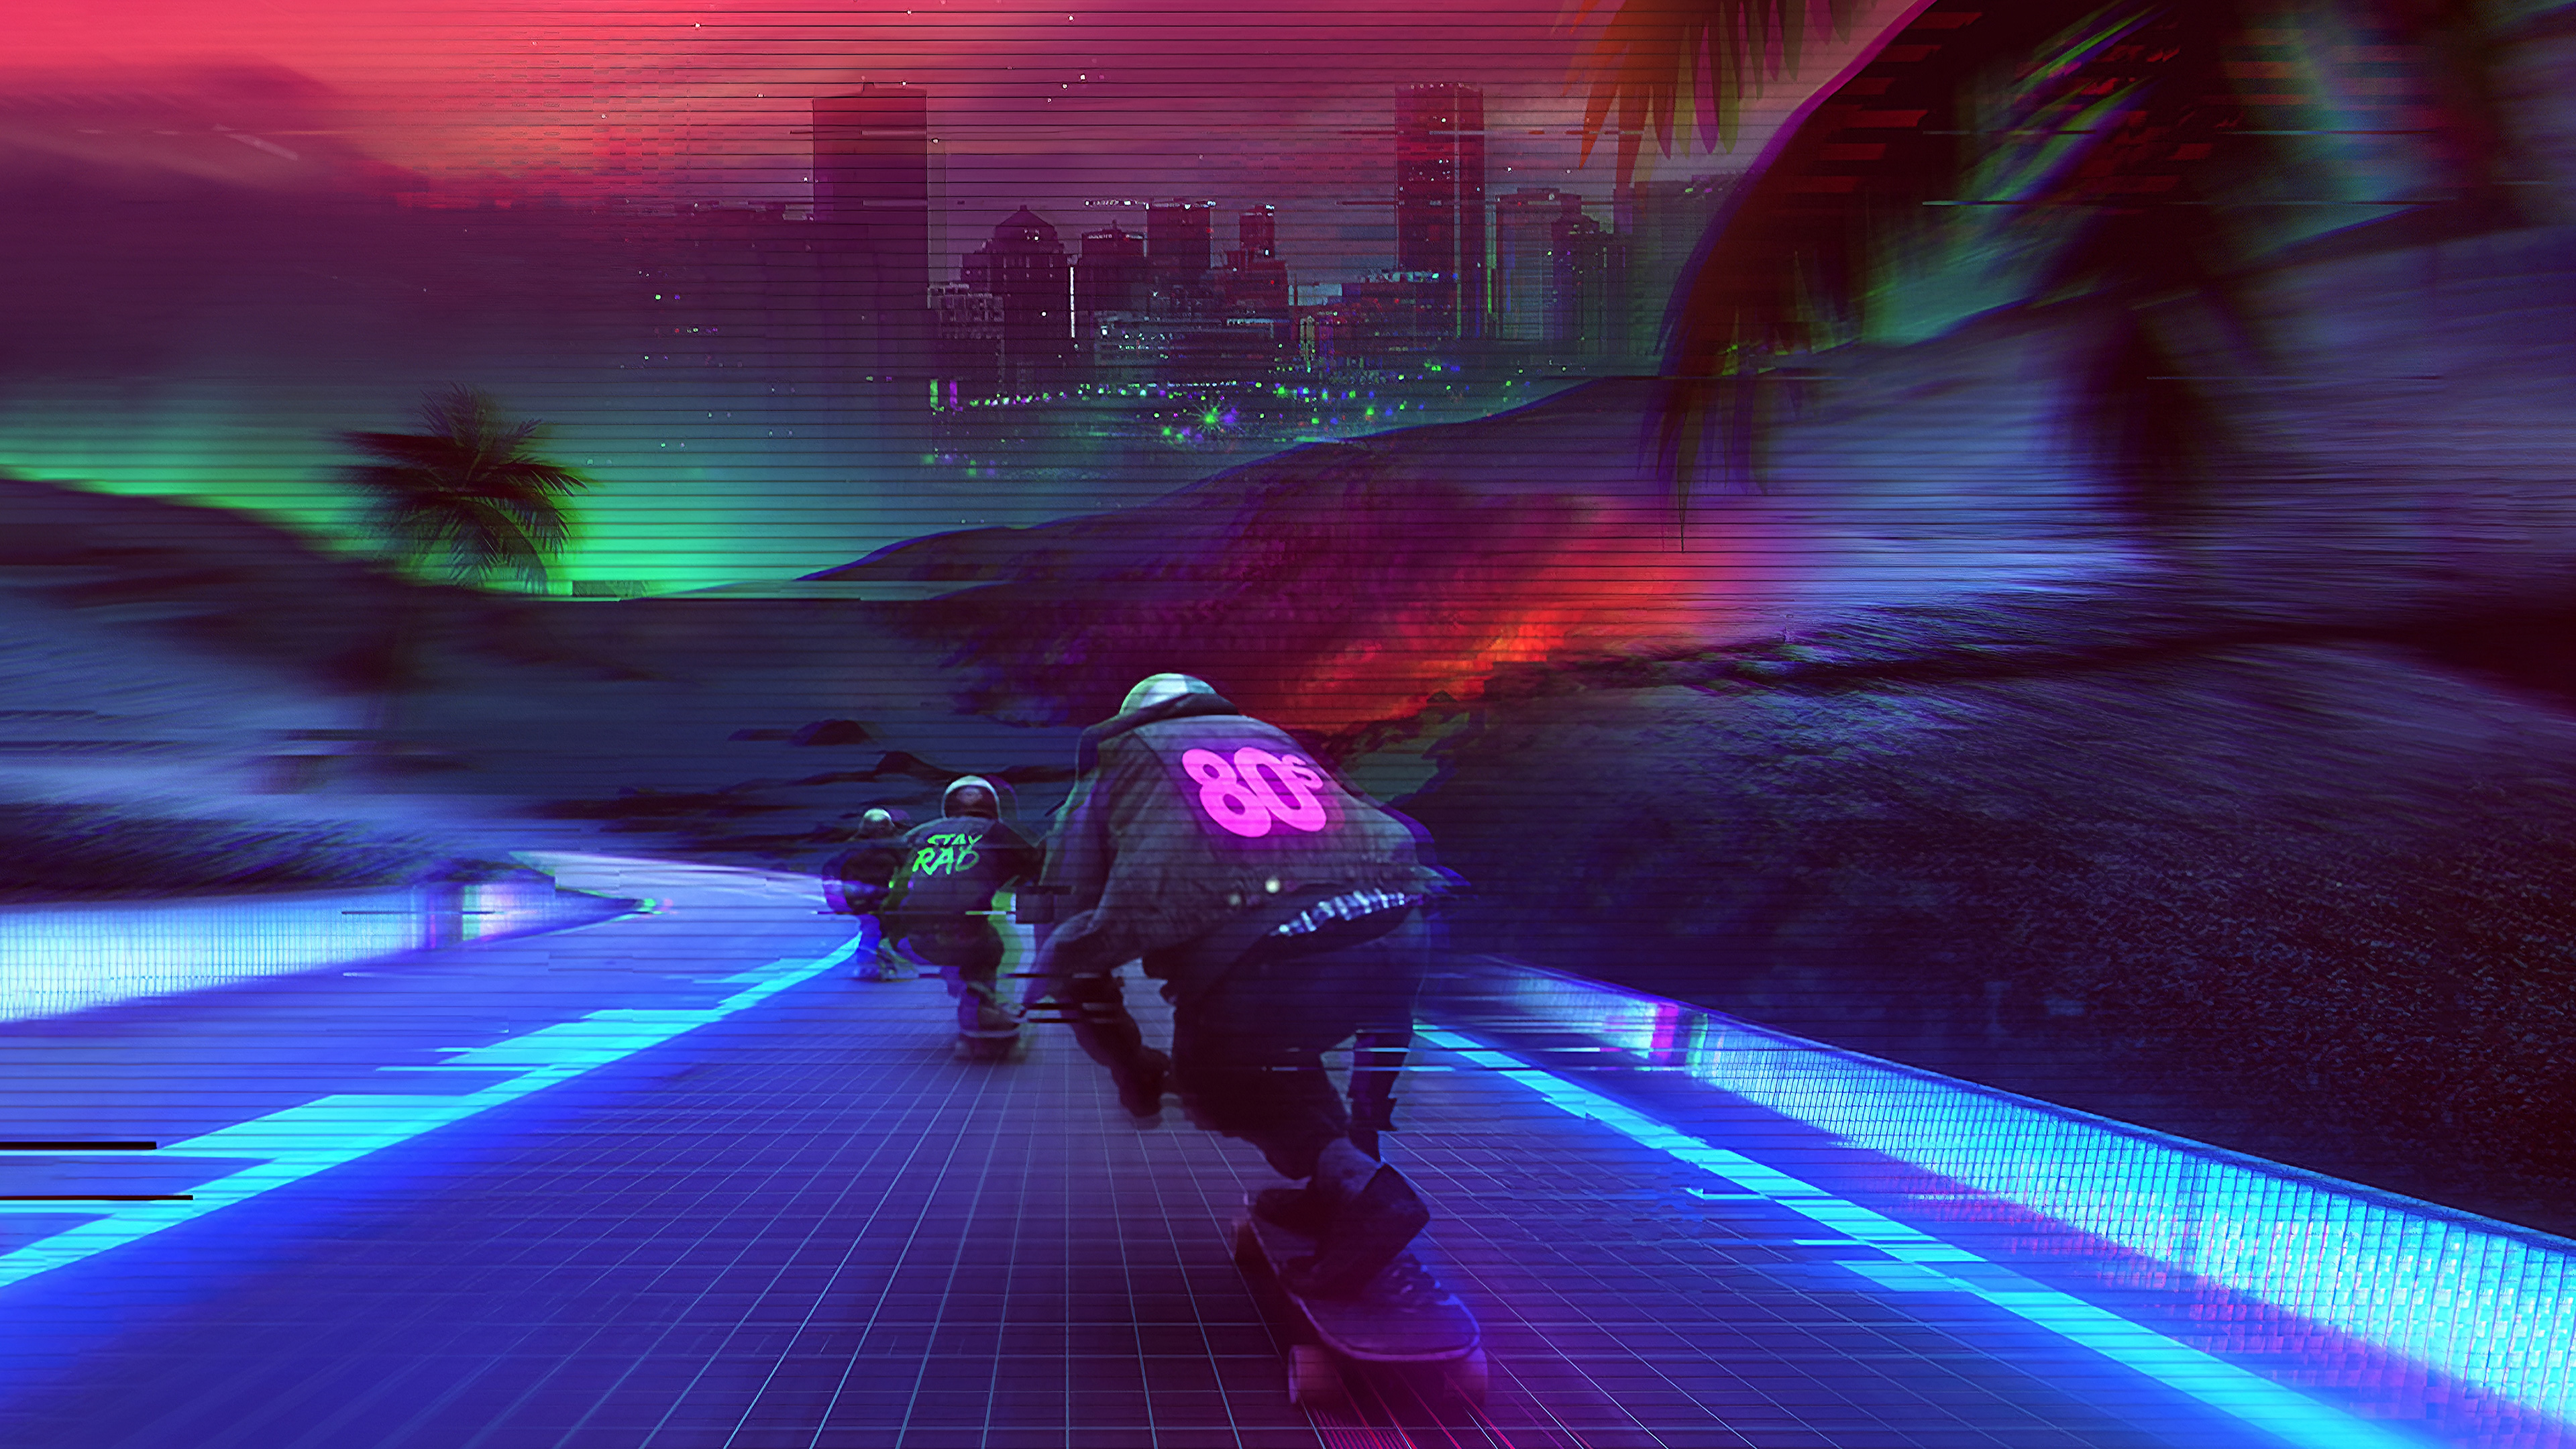 General 3840x2160 digital art artwork illustration vaporwave synthwave Synthpop retrowave people 1980s 80s neon lights colorful glowing skateboard skateboarding skating landscape trees palm trees glitch art city city lights architecture building tower skyscraper futuristic cyber cyber city cyberpunk road dark environment concept art